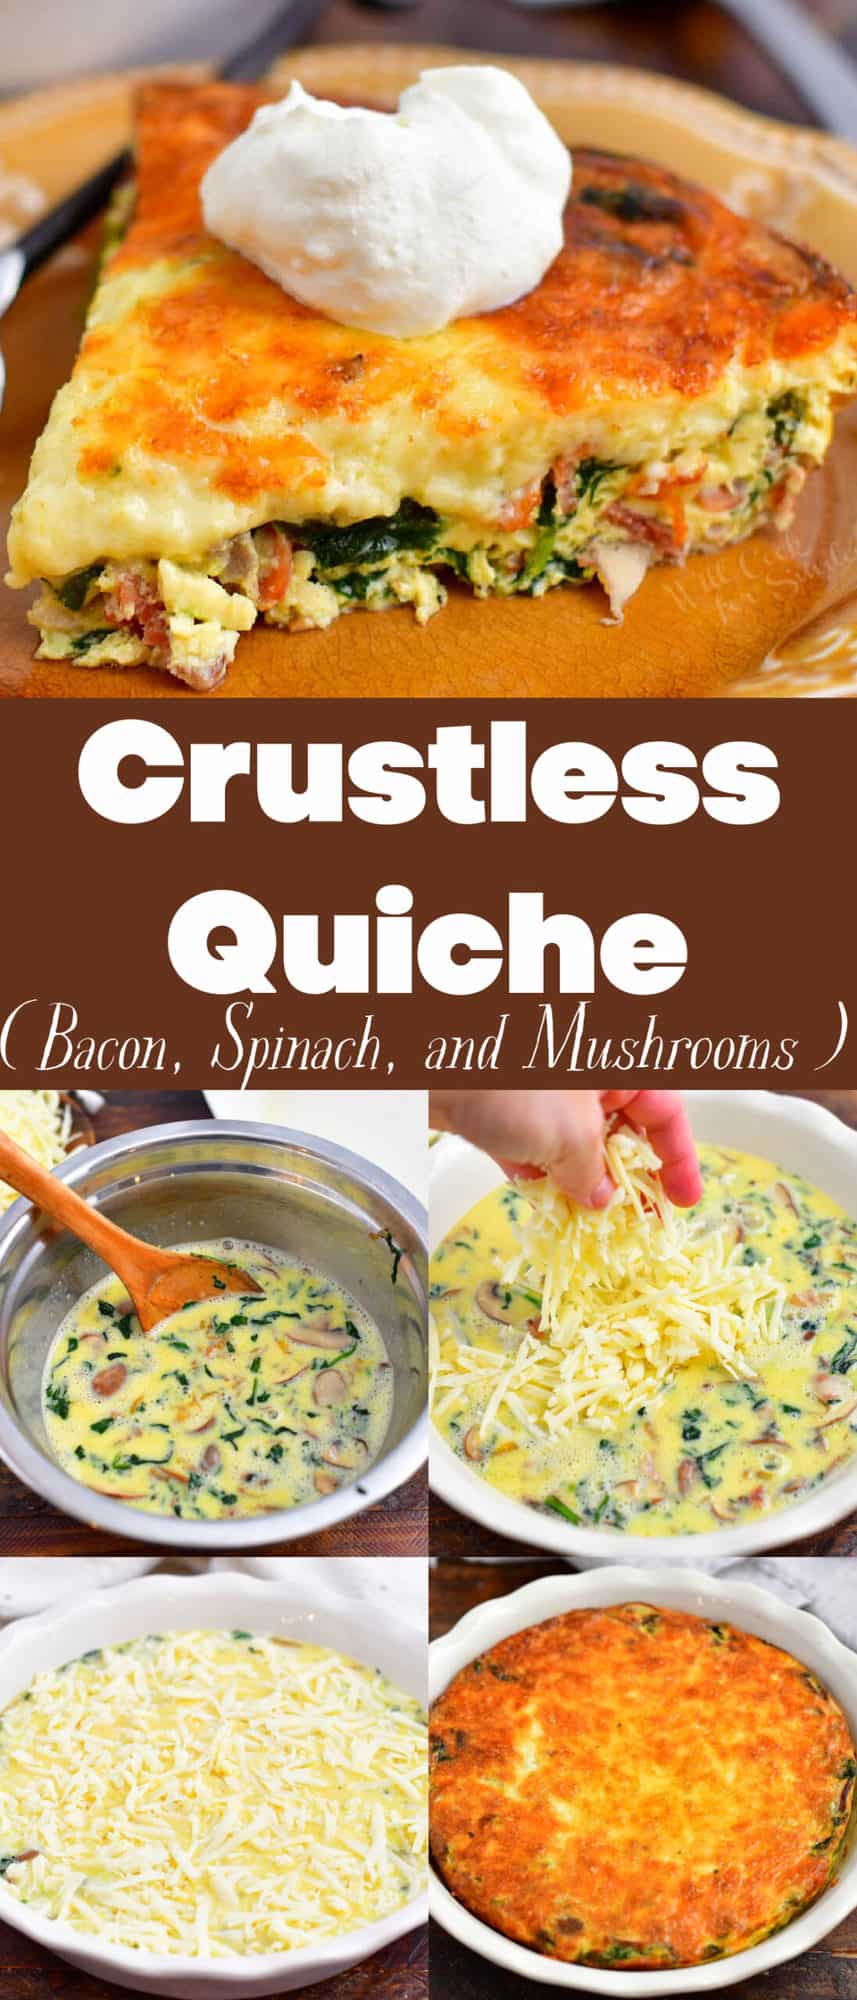 The title card for crustless quiche has images of the process and final result of the recipe.